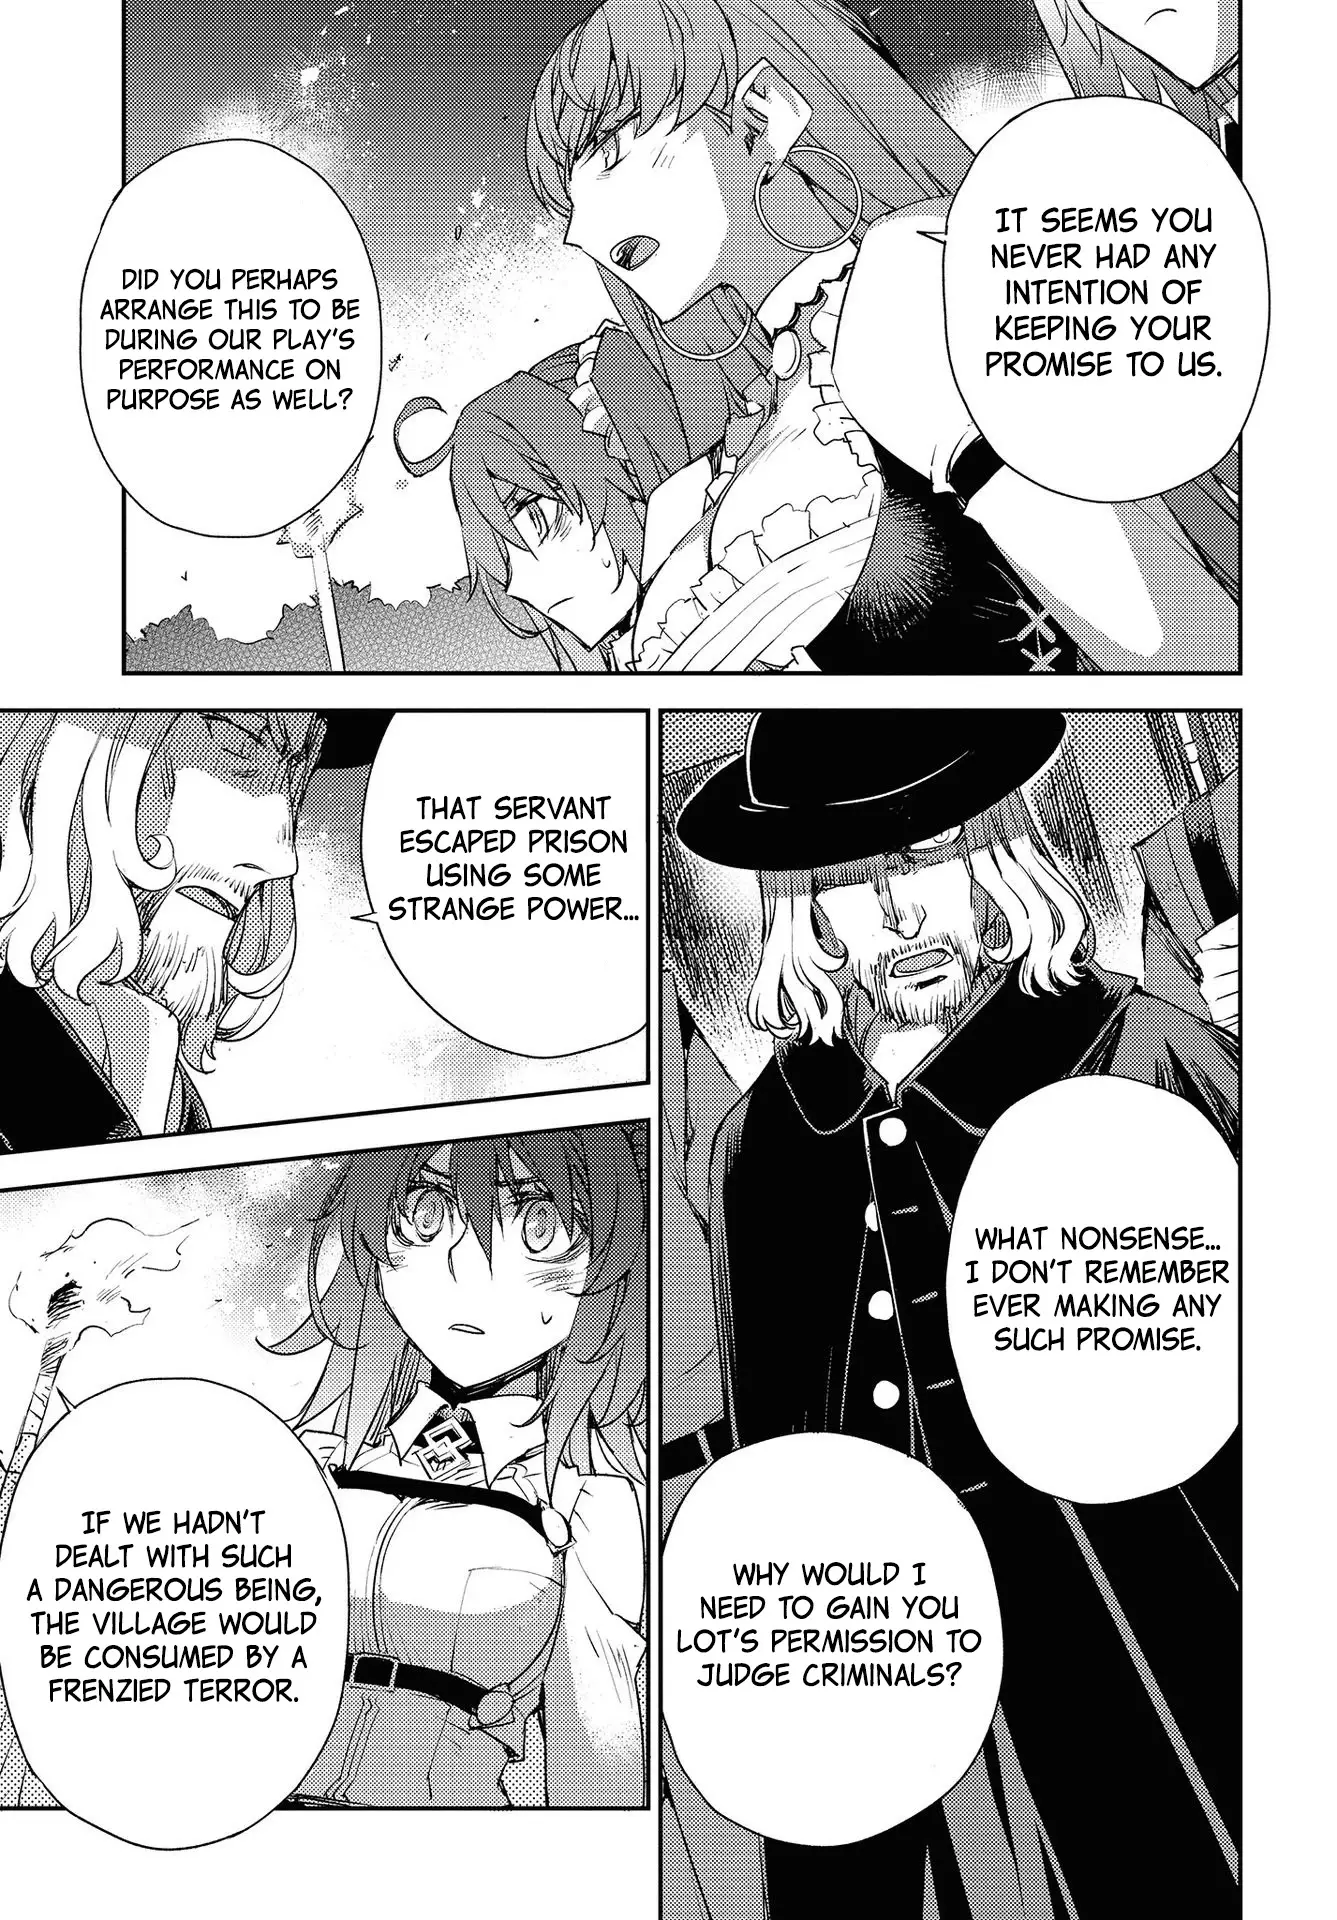 Fate/grand Order: Epic Of Remnant - Subspecies Singularity Iv: Taboo Advent Salem: Salem Of Heresy - 15 page 3